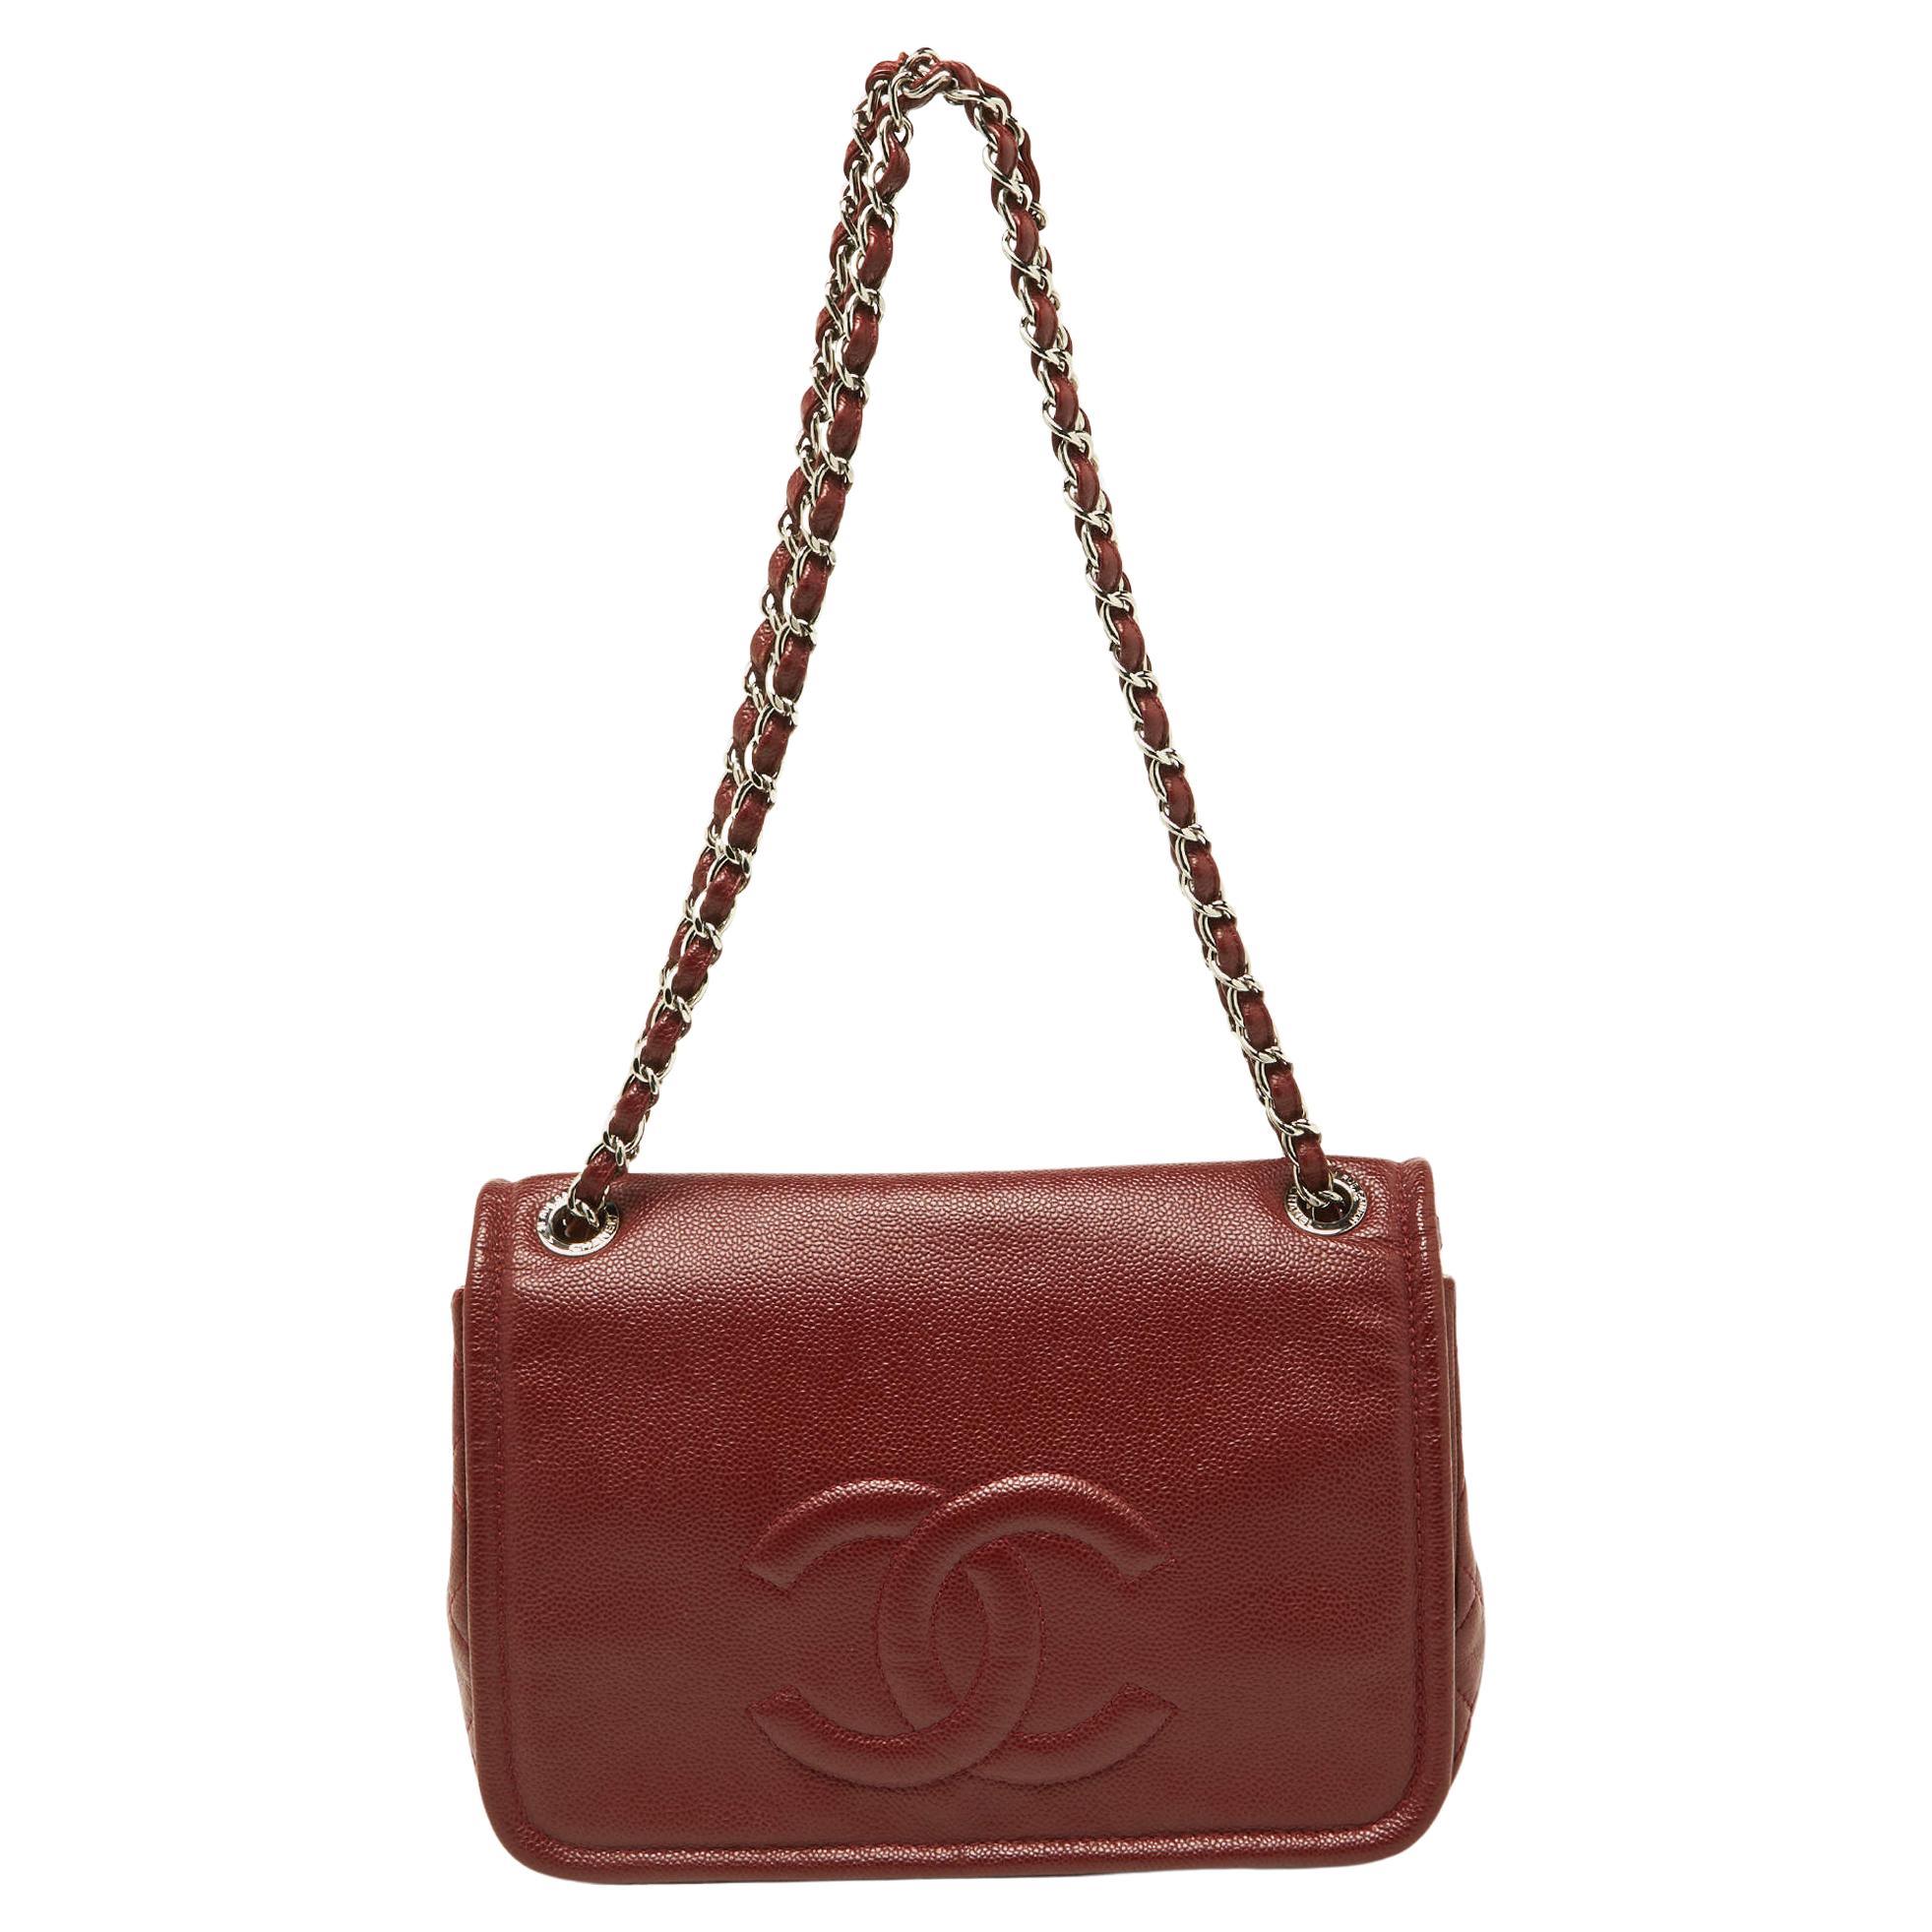 Chanel Dark Red Caviar Leather Large CC Timeless Flap Bag For Sale